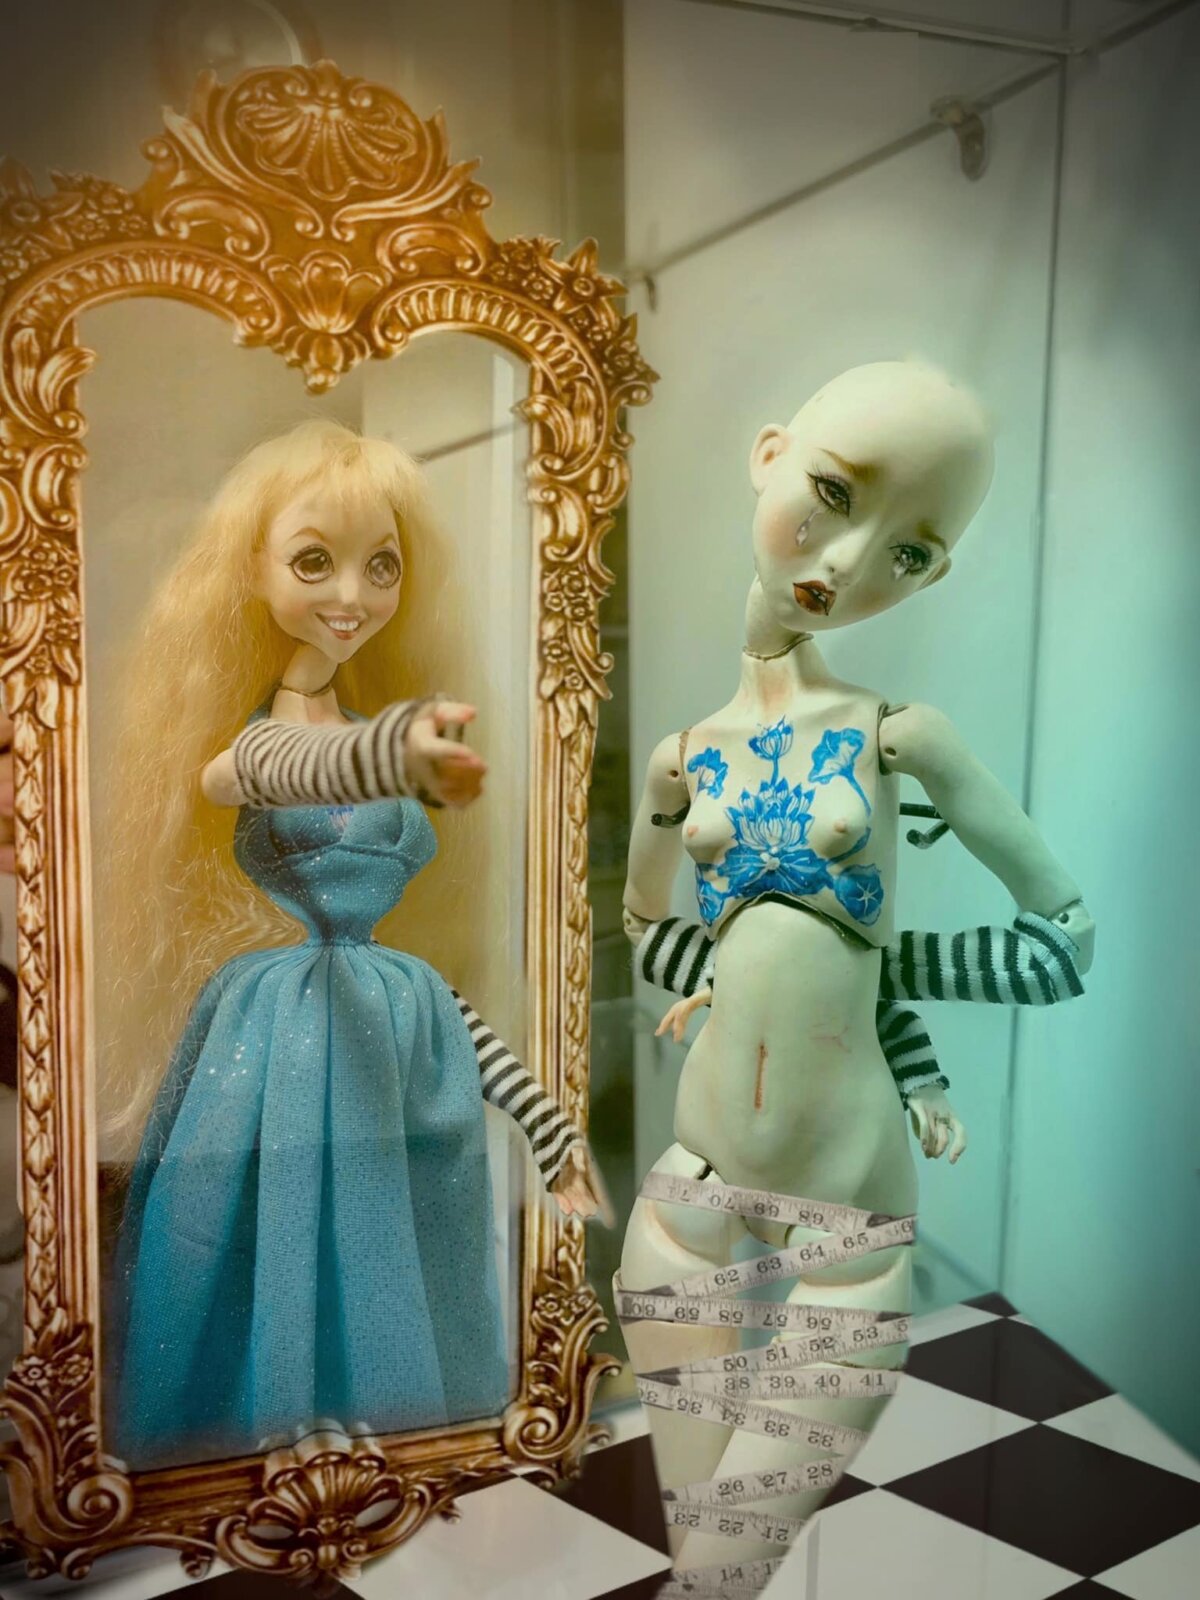 Absolutely Stunning Ball Jointed Dolls By Bui Thinh Da 5